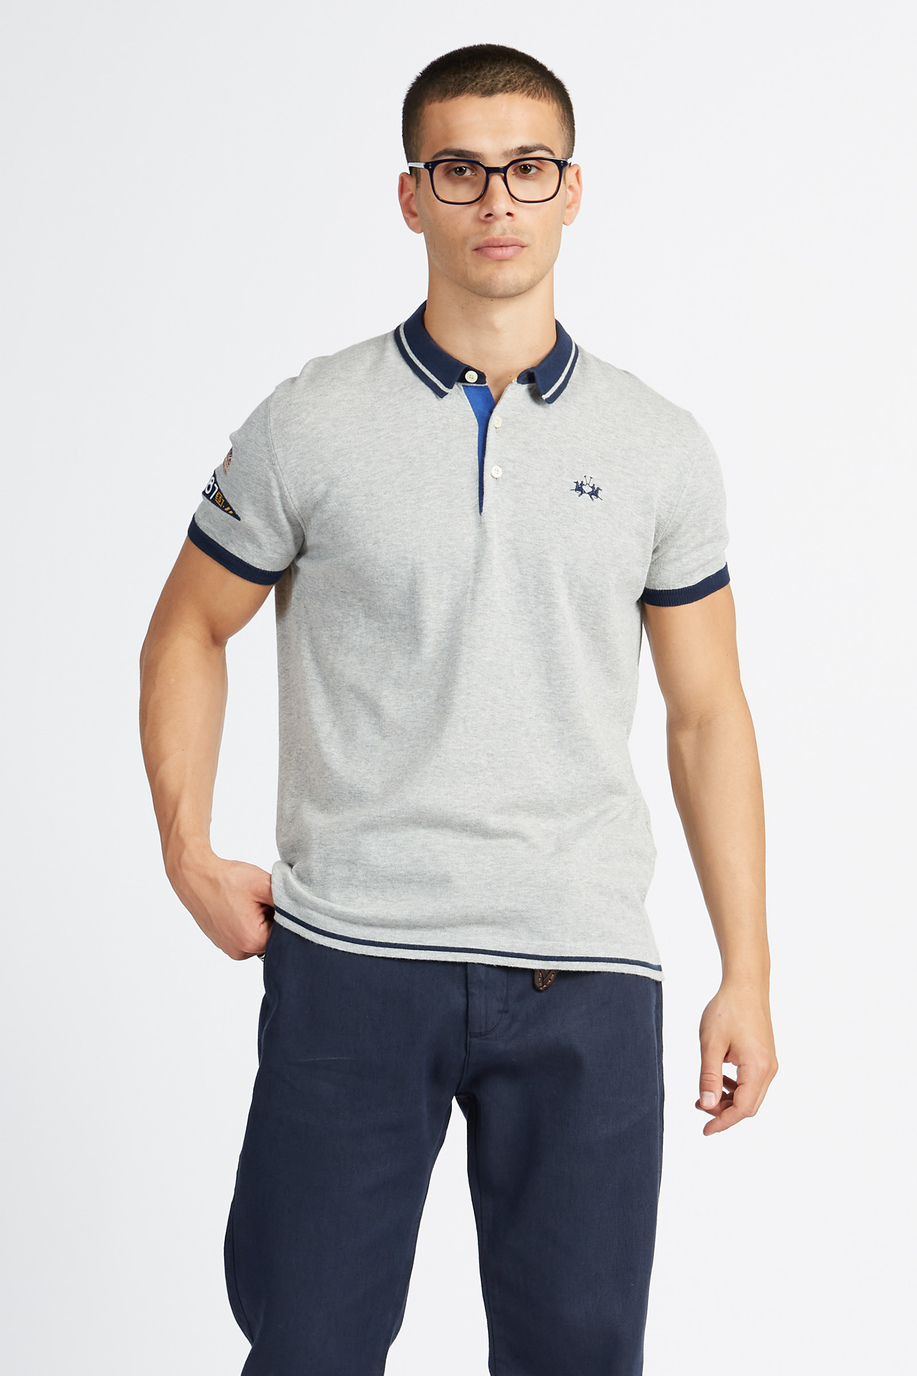 Short-sleeved men's tricot sweater in solid color Polo Academy - Victorin - Giftguide | La Martina - Official Online Shop